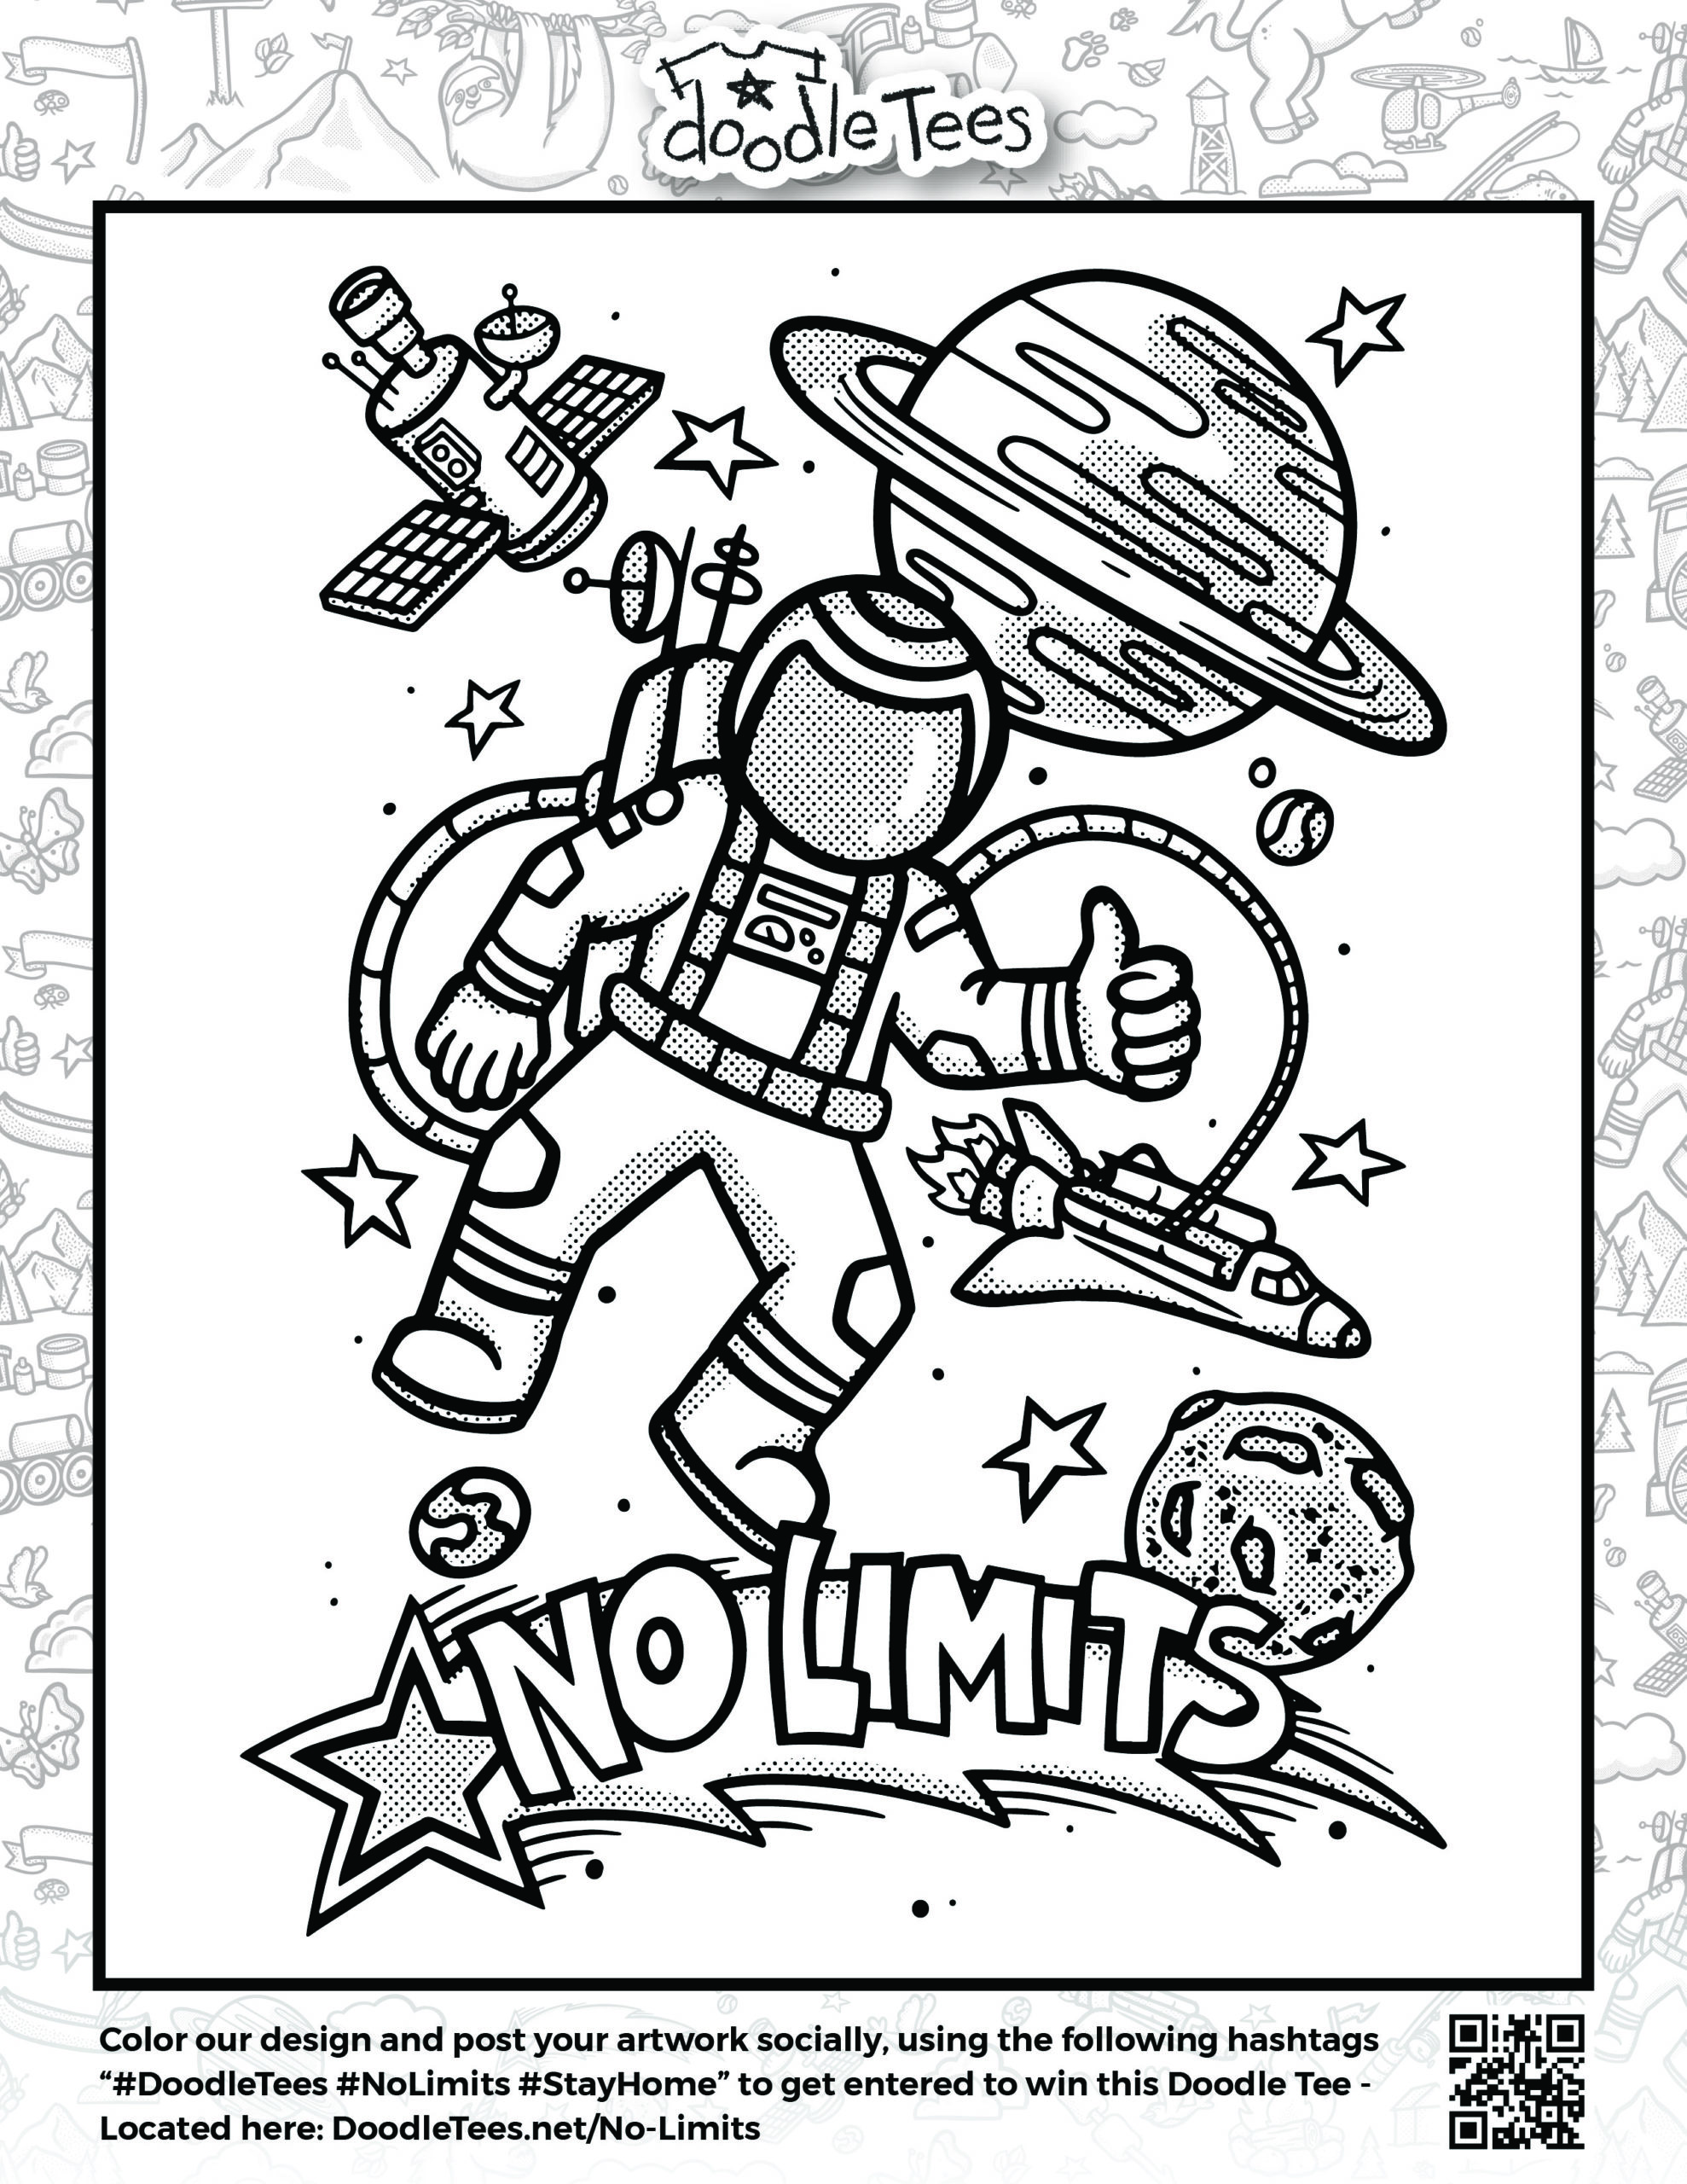 "Doodle Tees 'No Limits' astronaut, galaxy and skyrocket design to download and print at home"